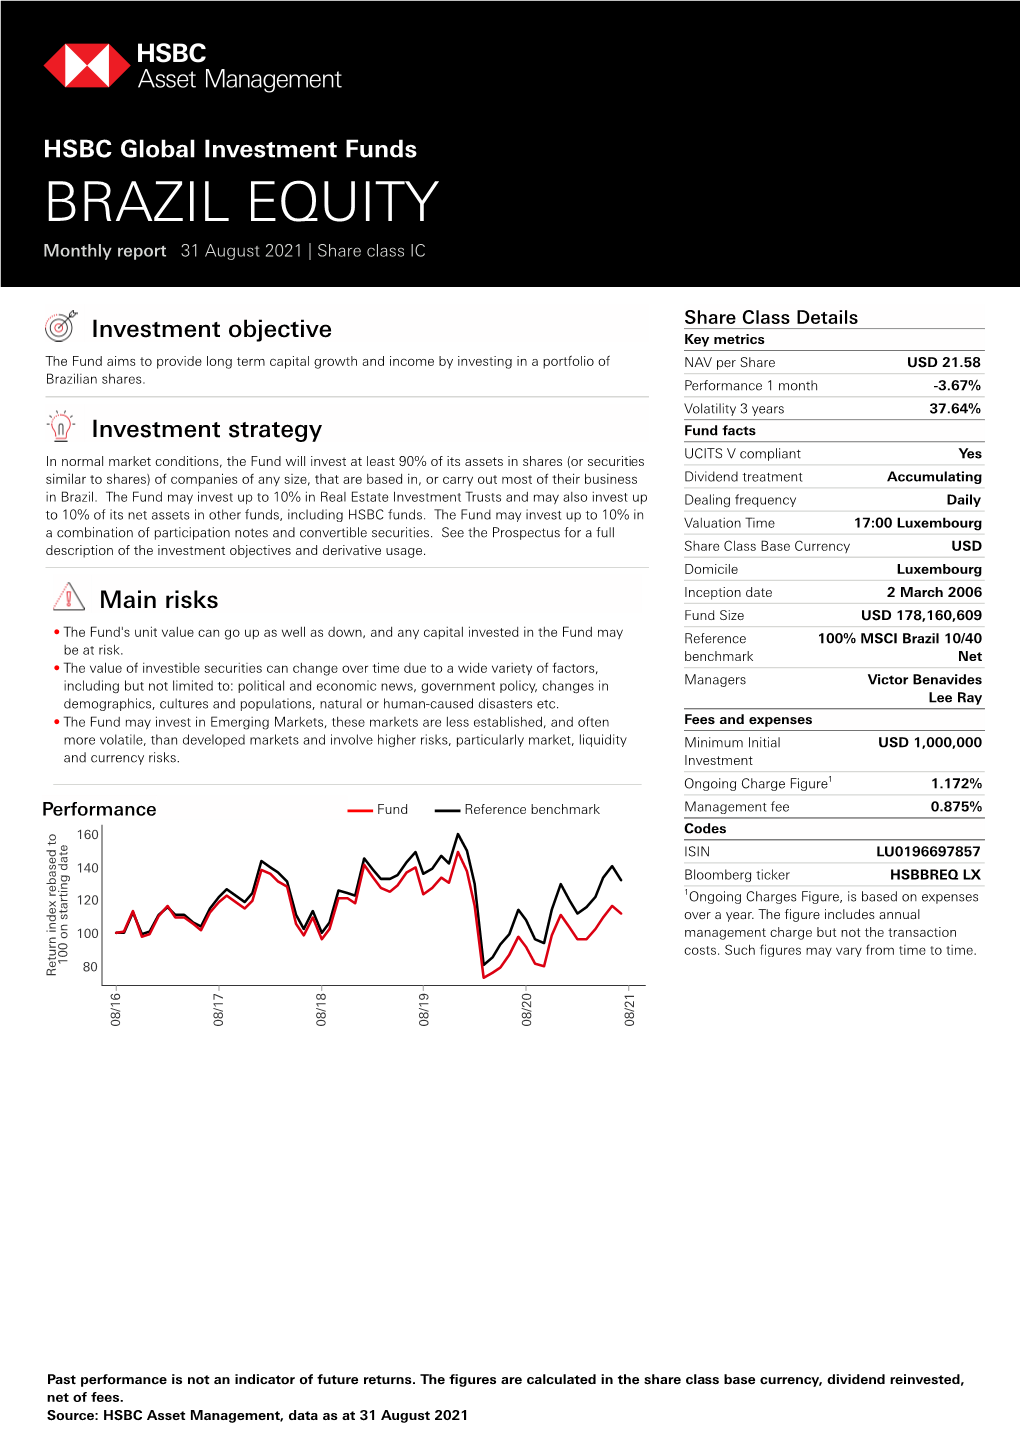 HSBC Global Investment Funds BRAZIL EQUITY Monthly Report 31 August 2021 | Share Class IC